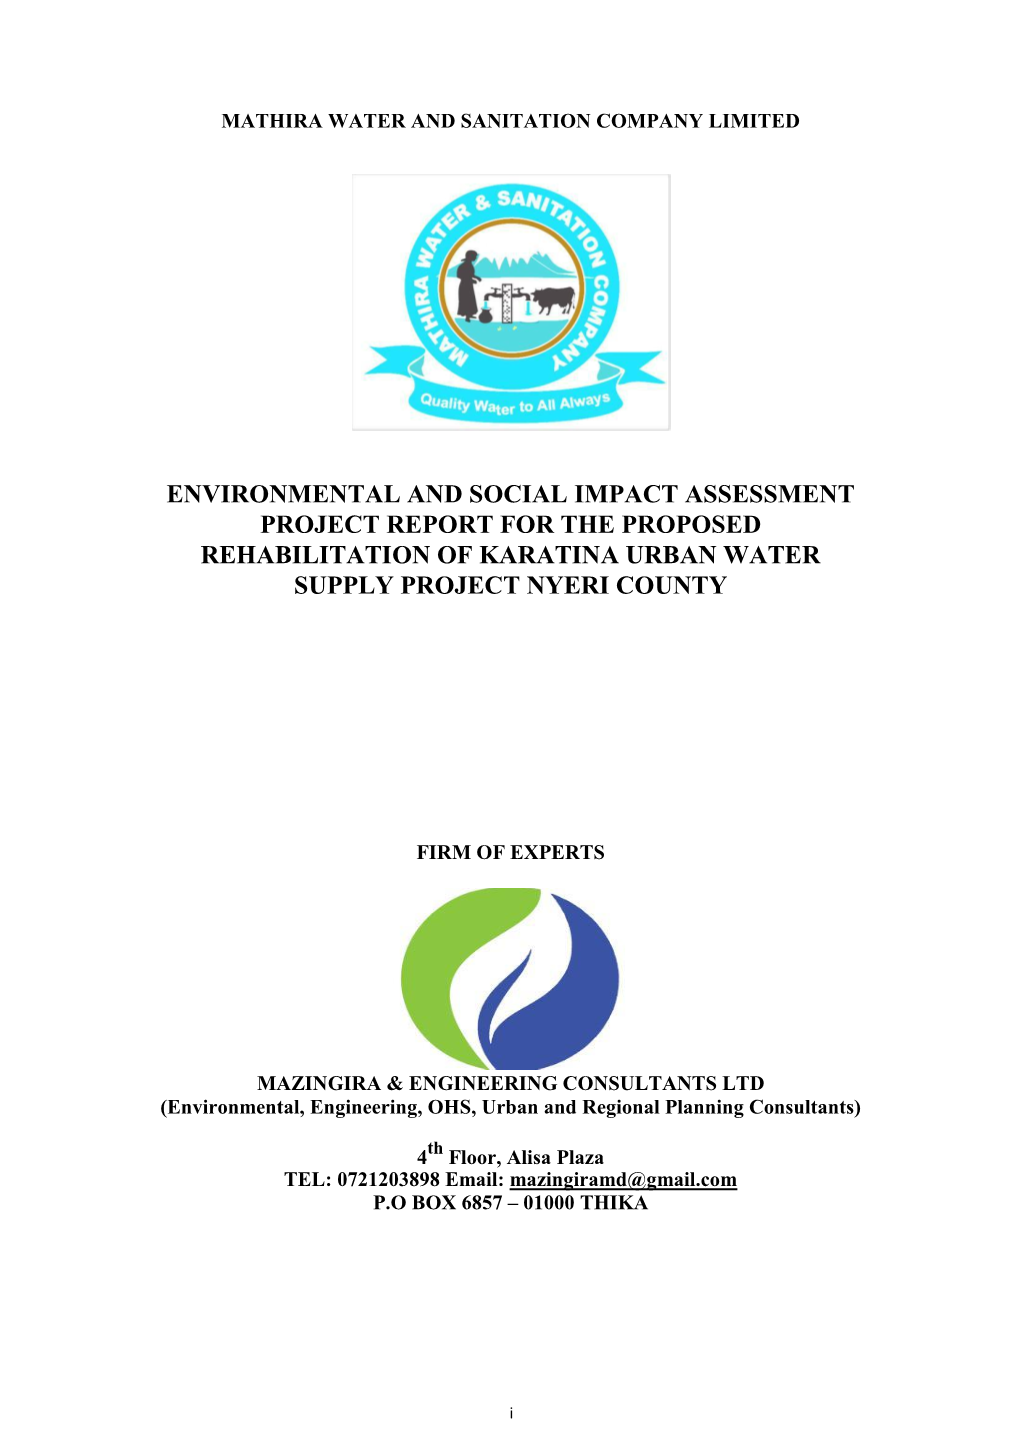 Environmental and Social Impact Assessment Project Report for the Proposed Rehabilitation of Karatina Urban Water Supply Project Nyeri County